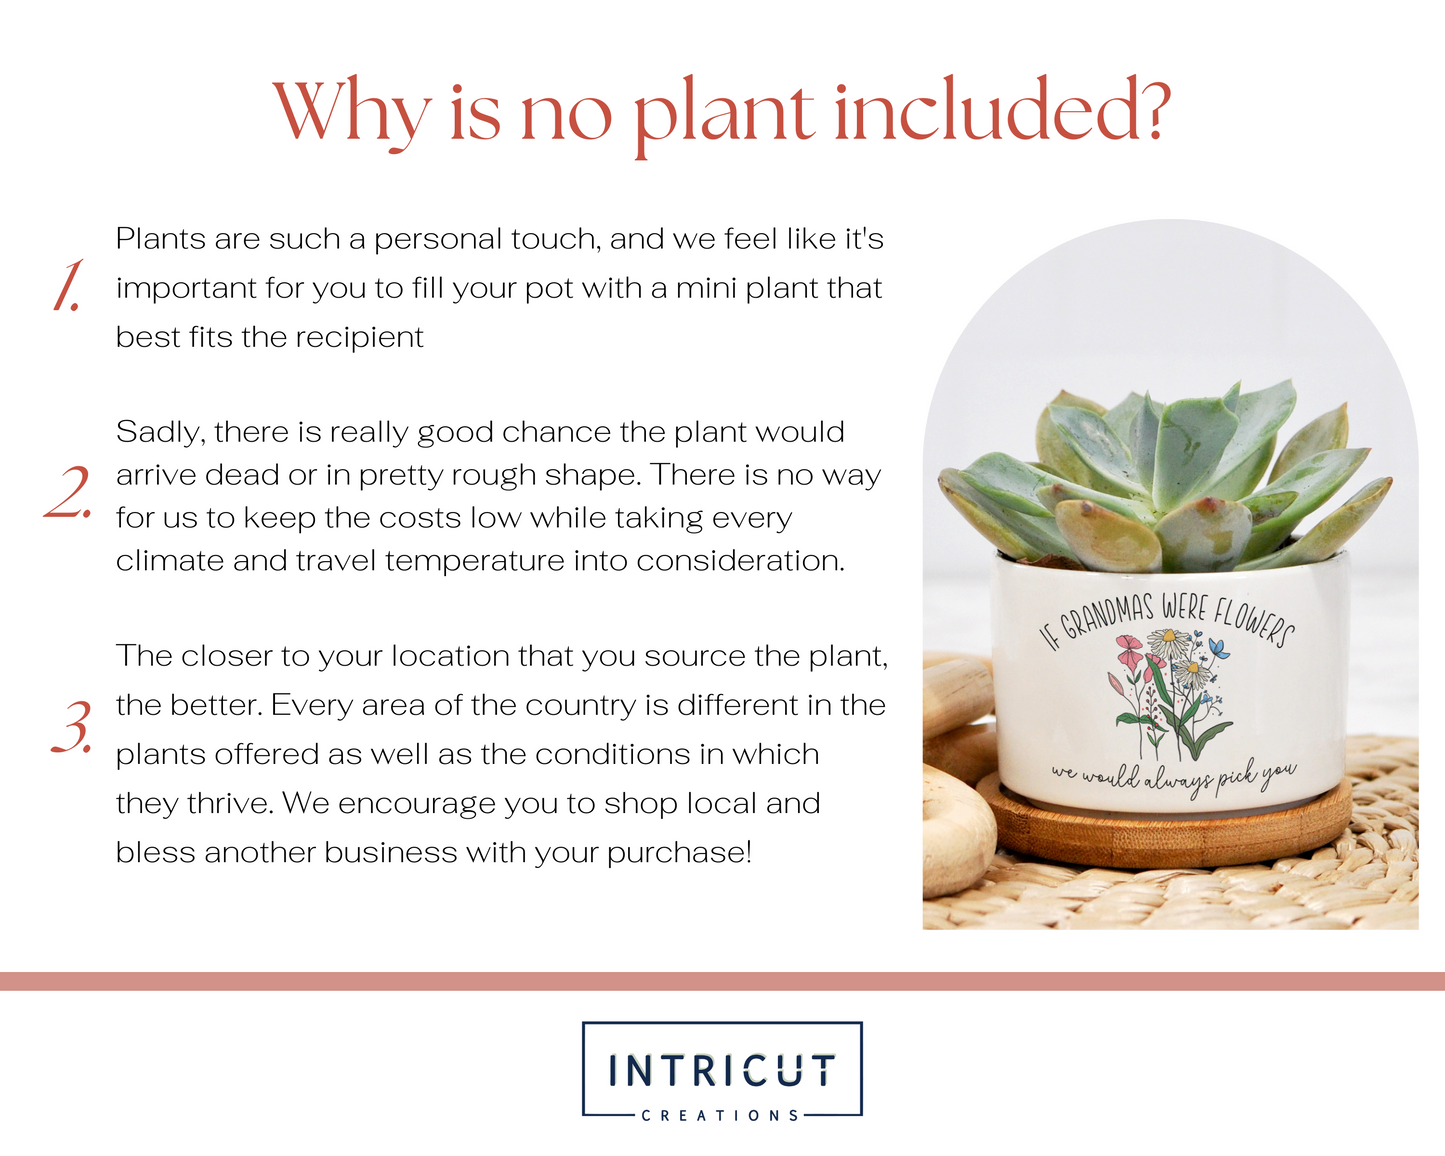 why is no plant included? cost, personal preference, delivery